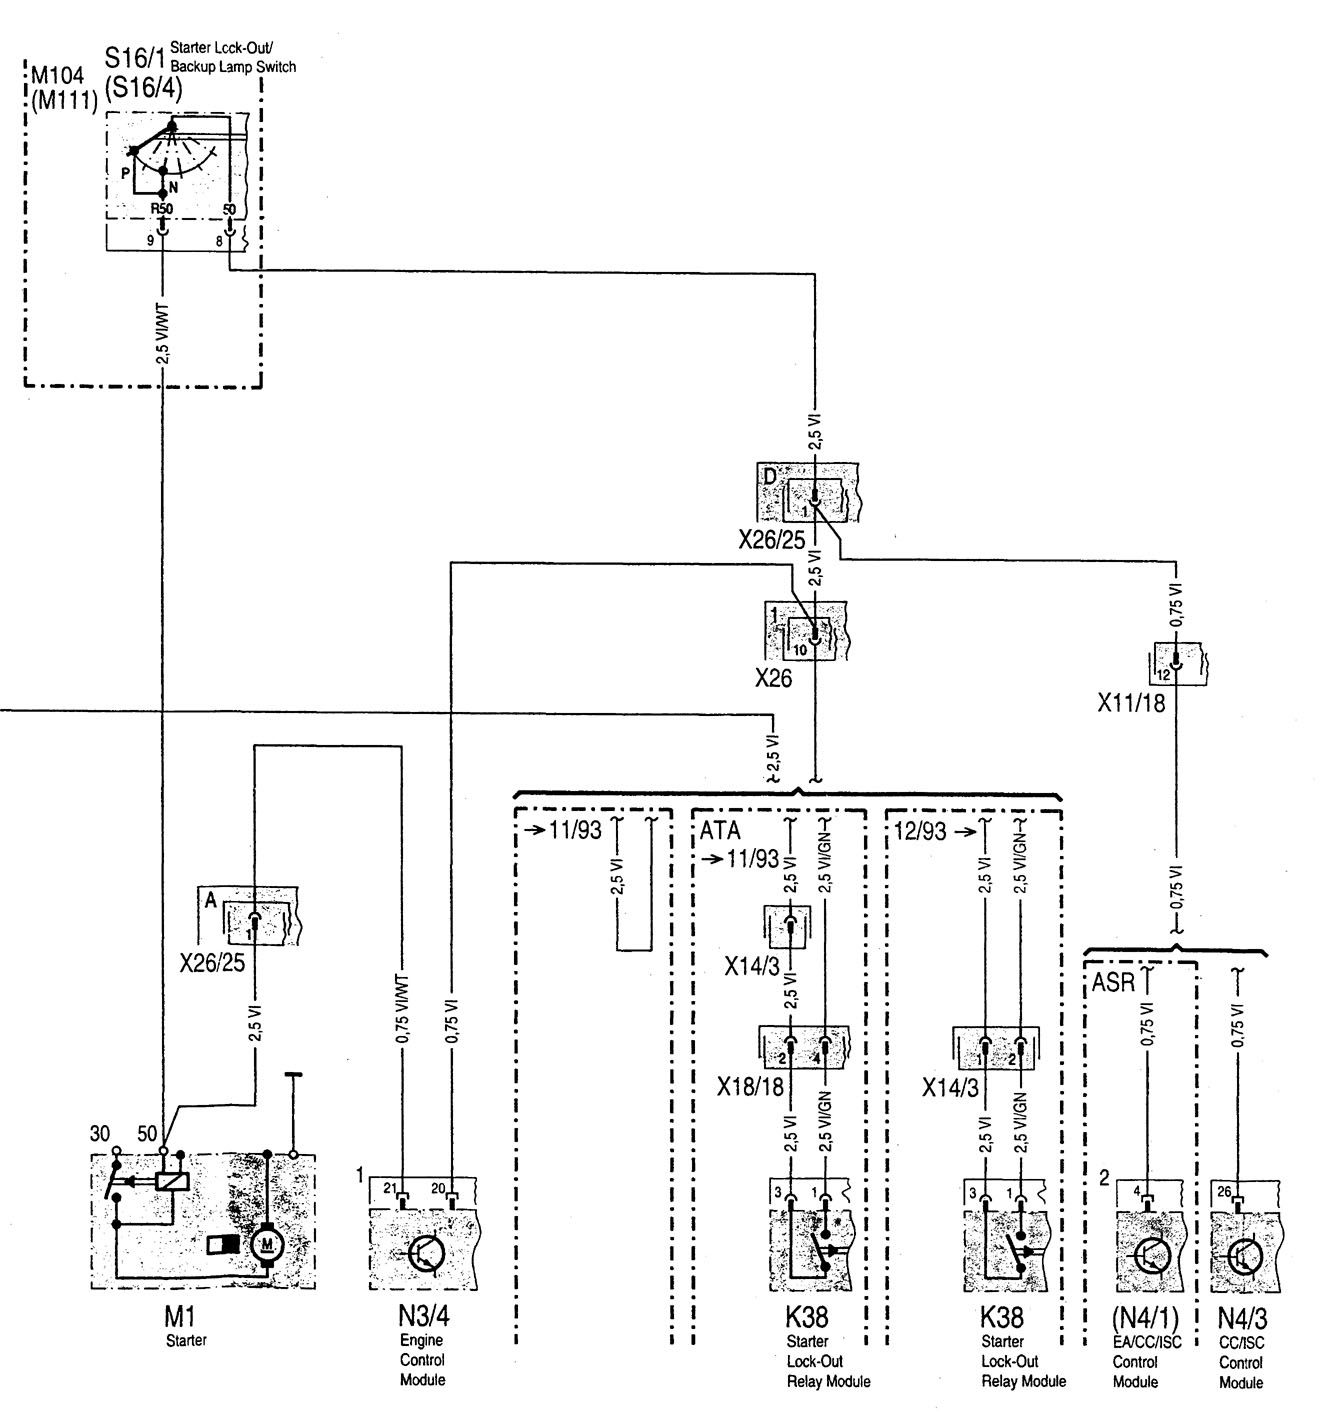 Mercedes W208 Turn Signal Wiring Diagram from www.carknowledge.info